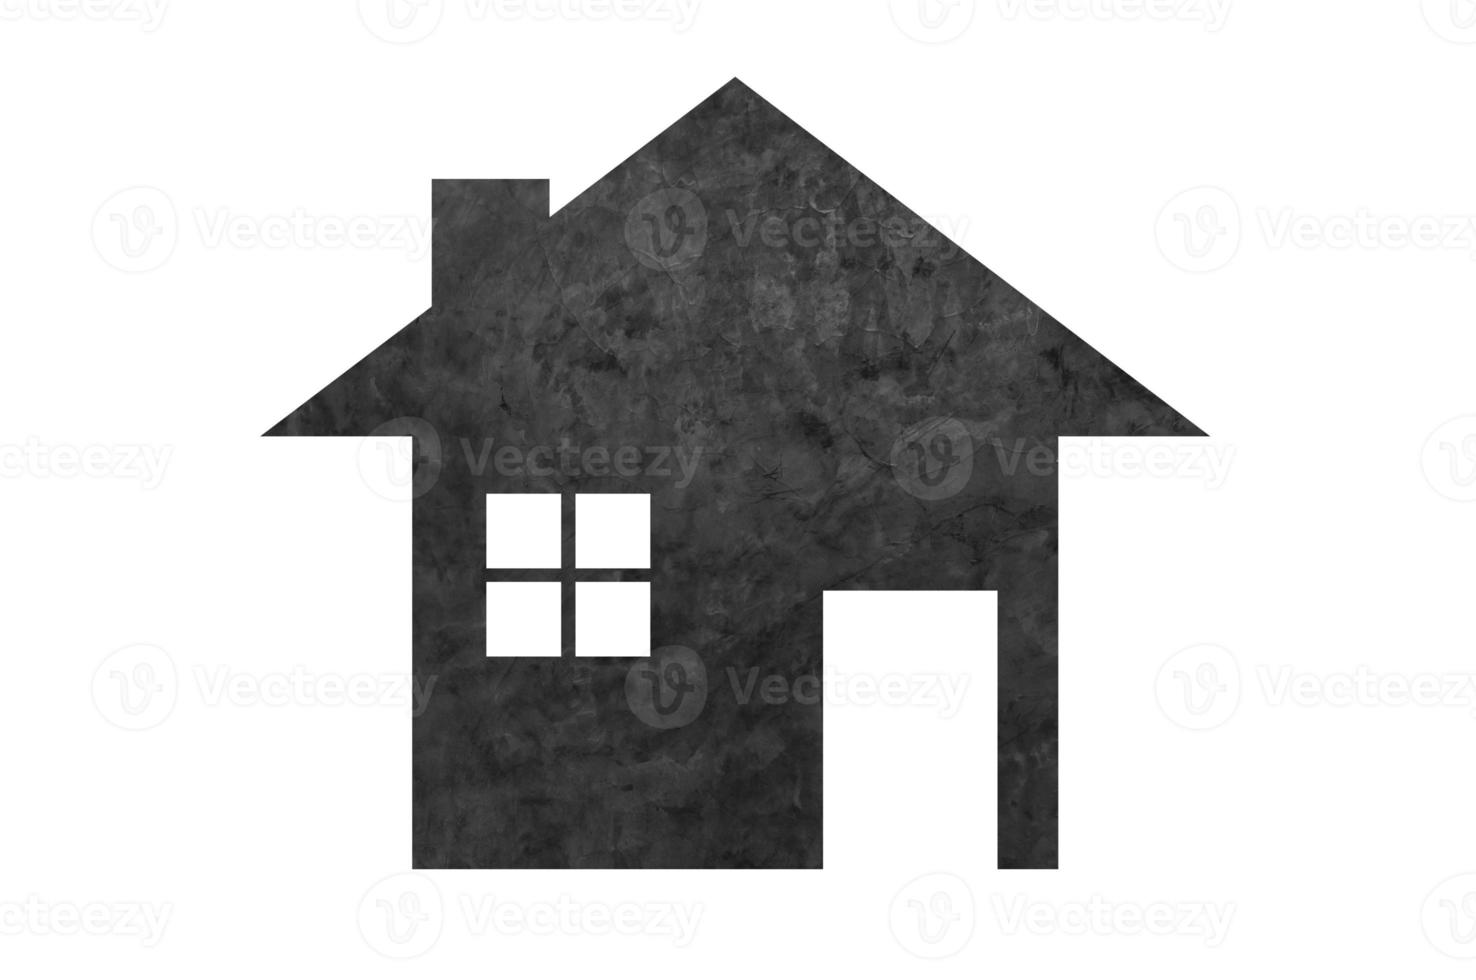 house icon from brick stone texture background as symbol of mortgage,Dream house on nature background, isolated on white photo